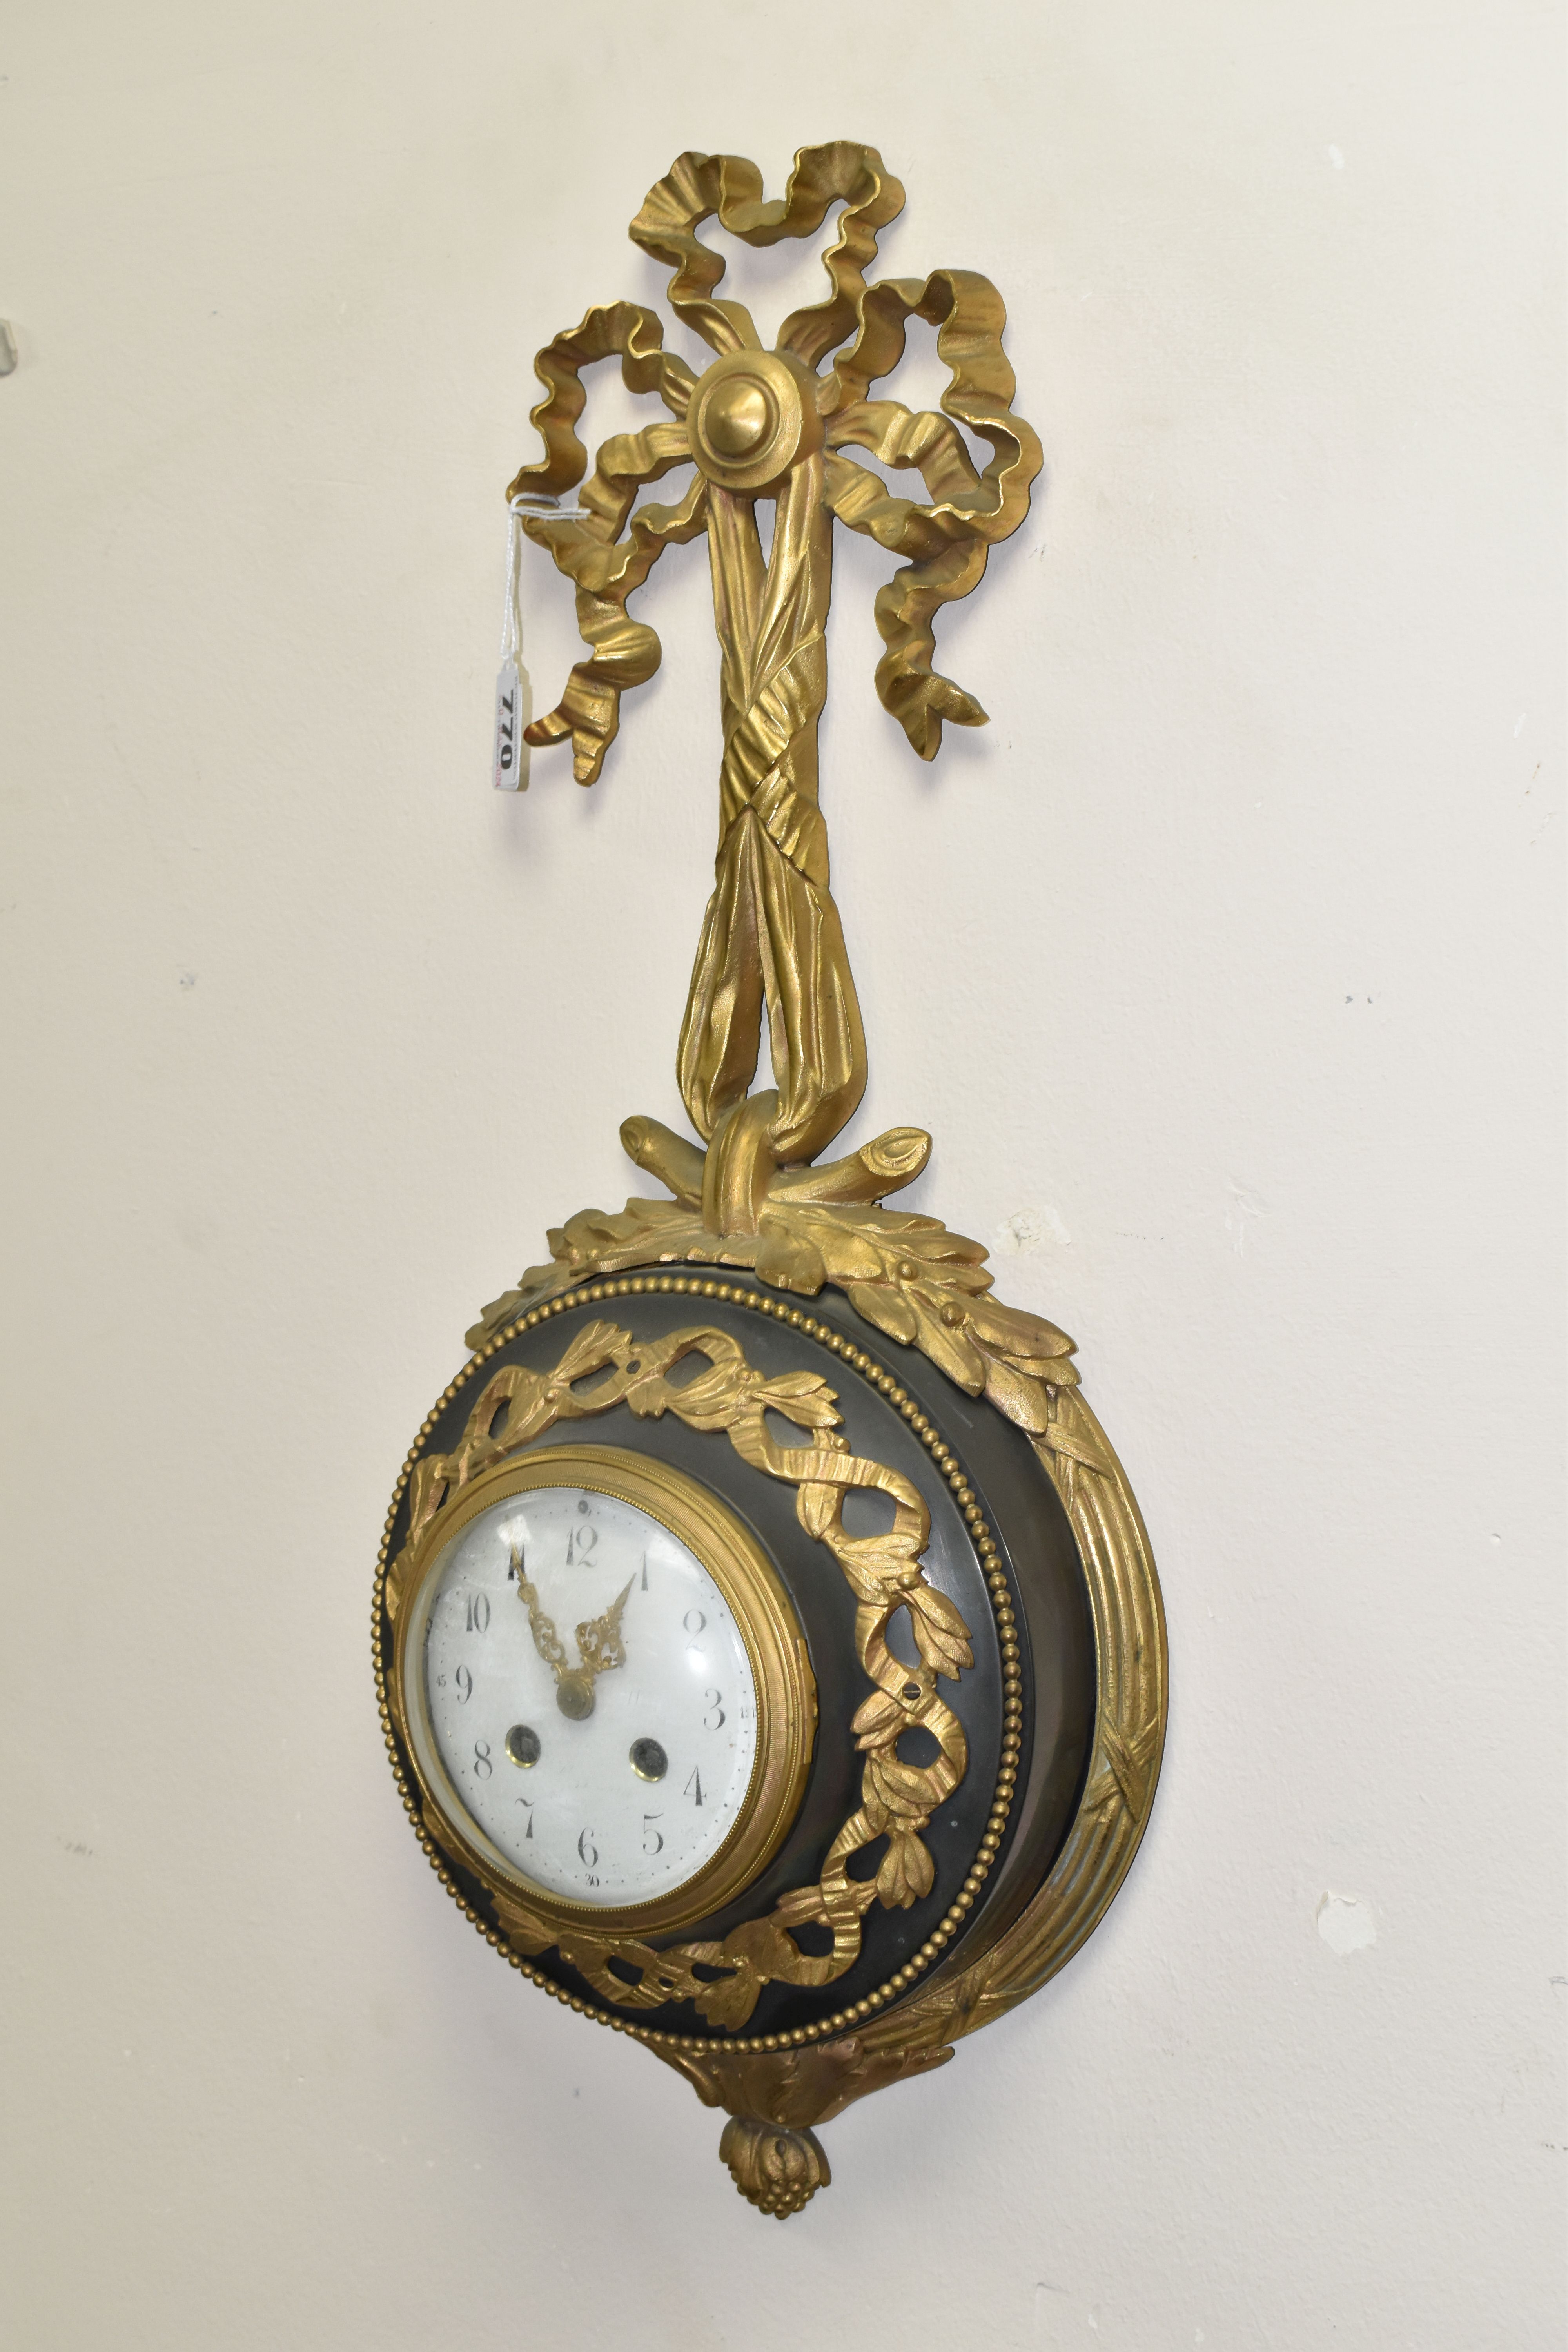 A LATE 19TH / EARLY 20TH CENTURY CARTEL CLOCK BY SAMUEL MARTI, cast gilt metal ribbon and wreath - Image 2 of 10